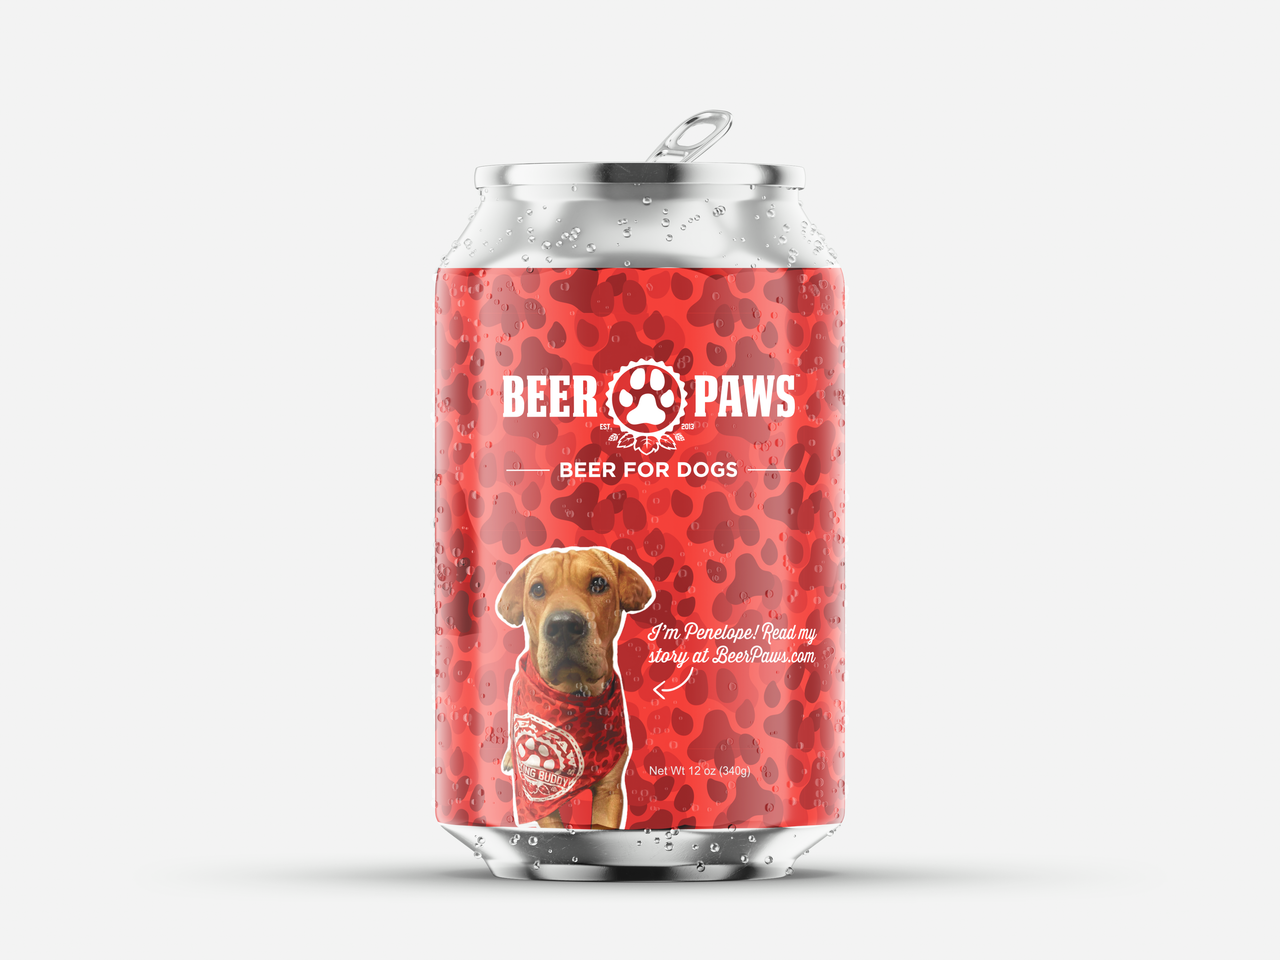 Beer Paws Craft Beer for Dogs in Cans